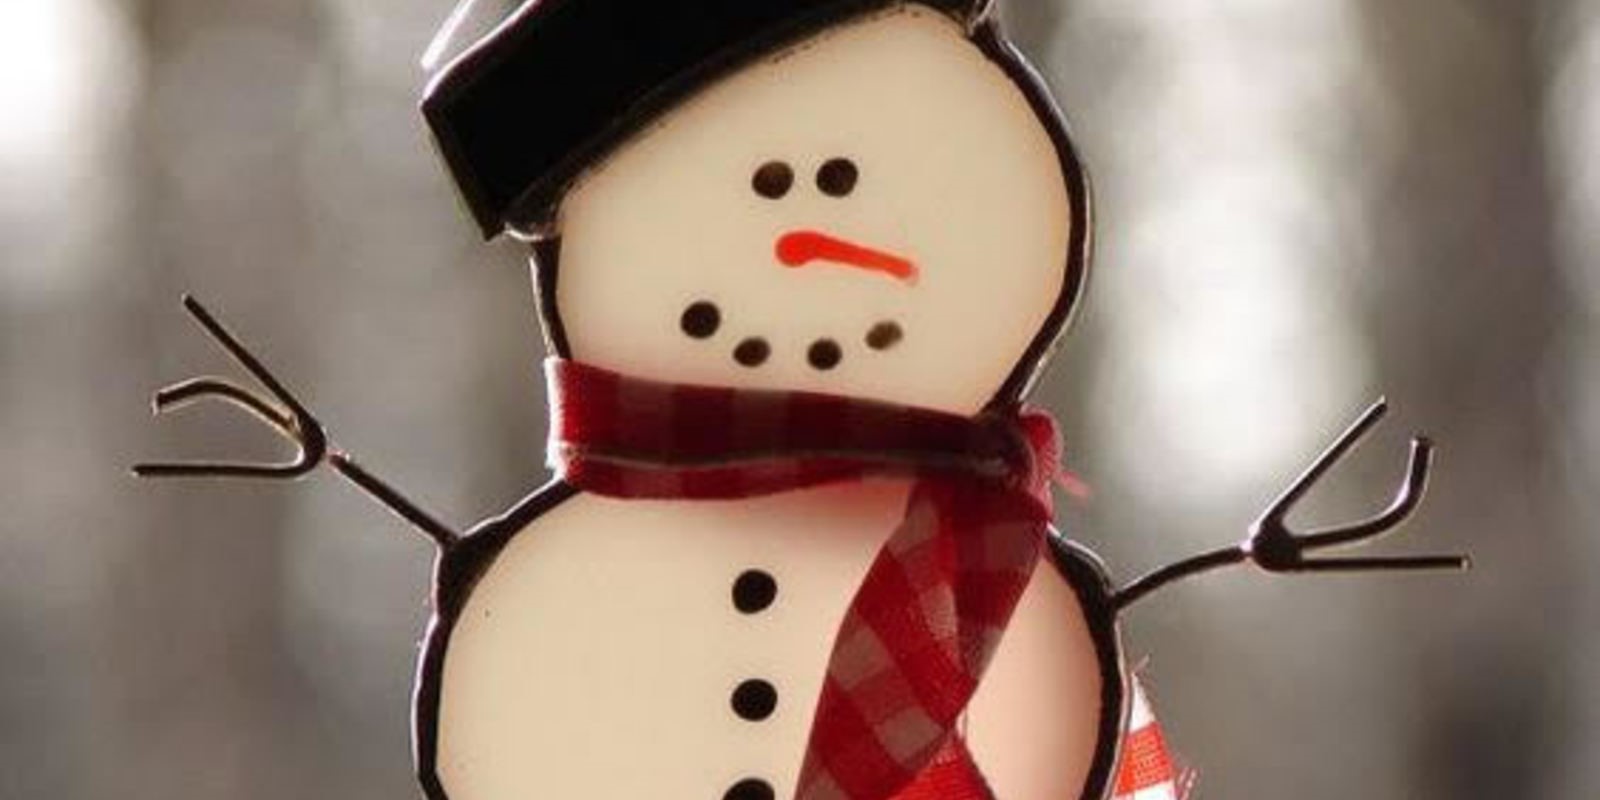 Snowman with a plaid scarf and blakc hat